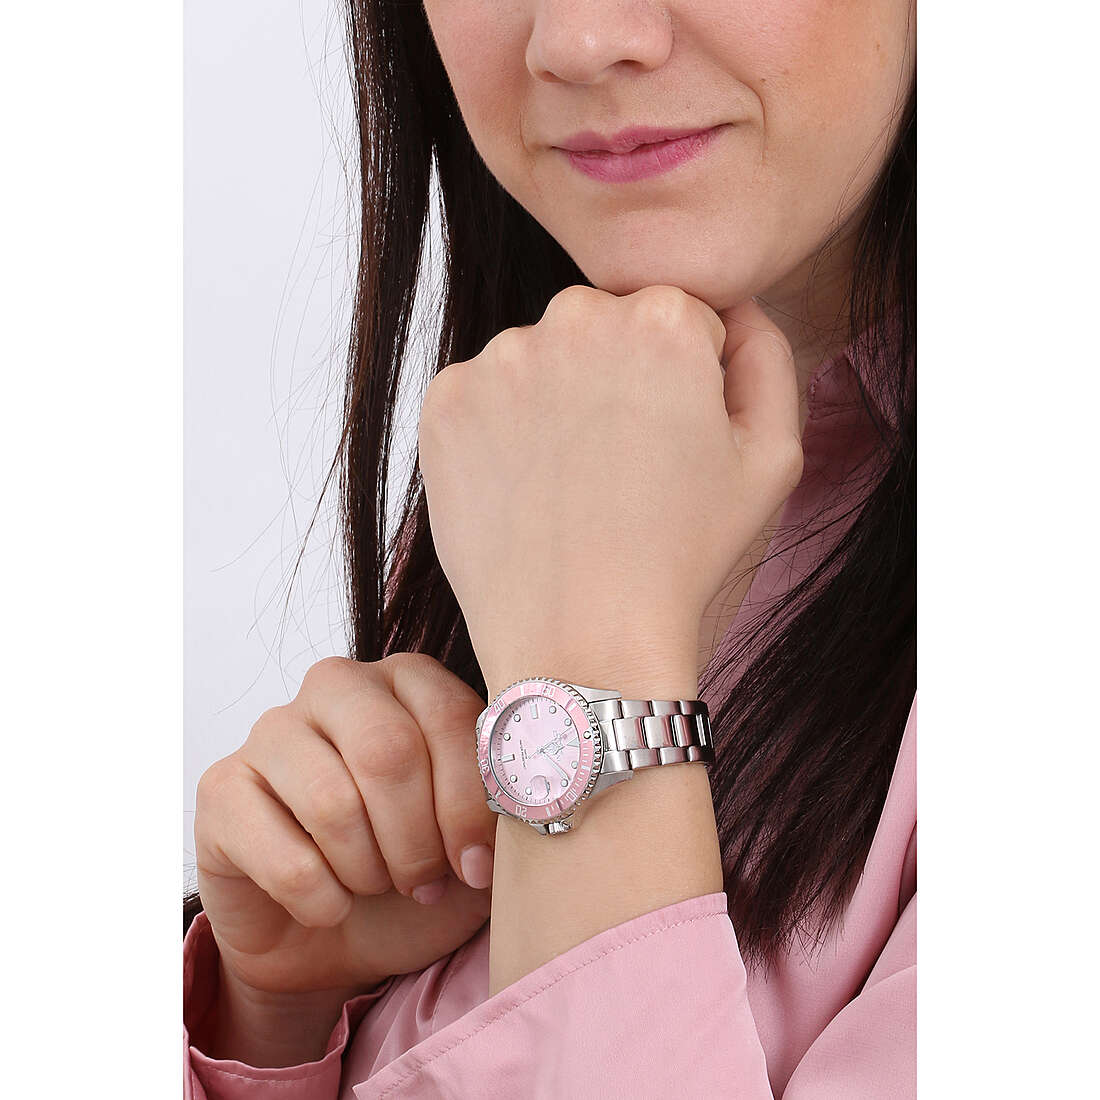 Capital only time Toujours woman AX342-04 wearing